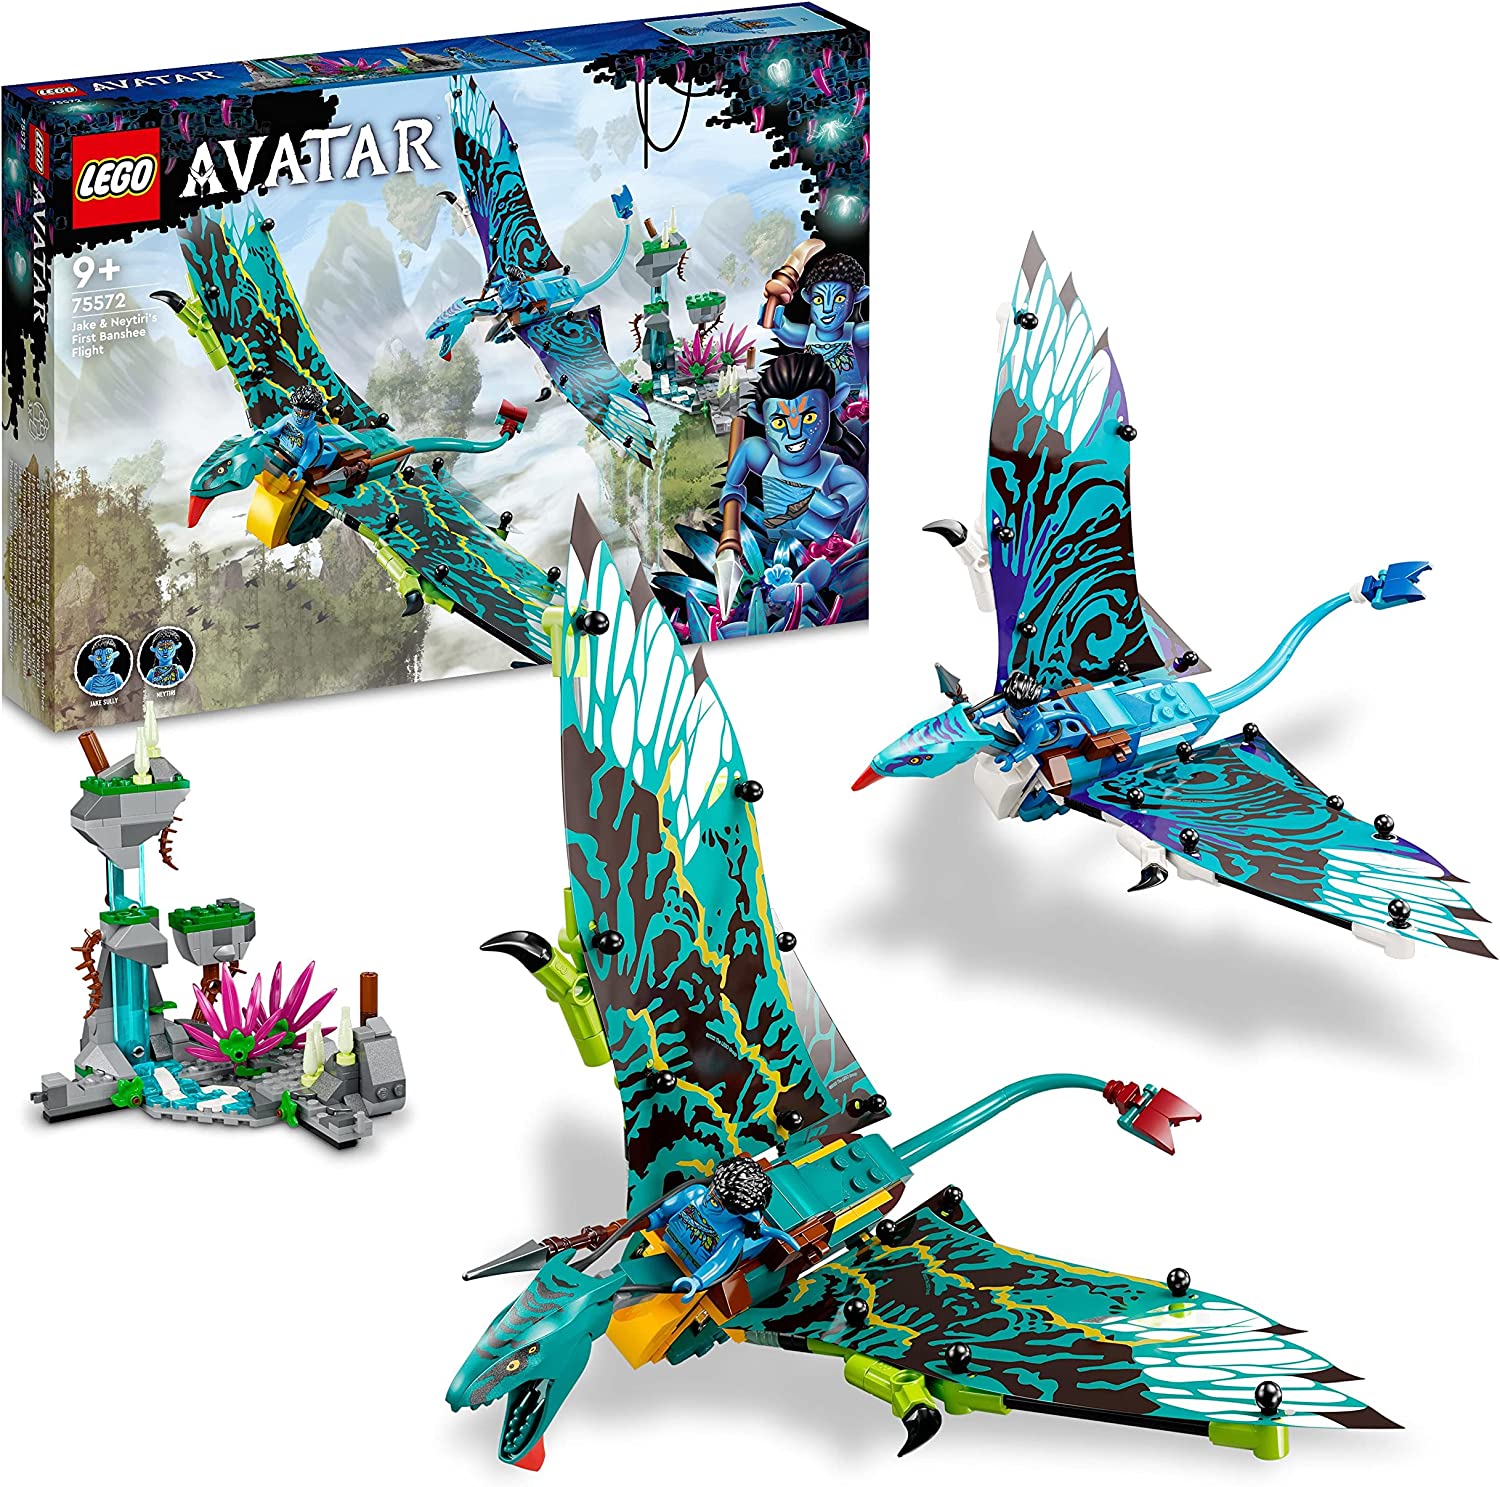 LEGO 75572 Avatar Jake and Neytiris First Flight on a Banshee, Pandora Film Set with Banshees, Minifigures and Glow in the Dark Elements